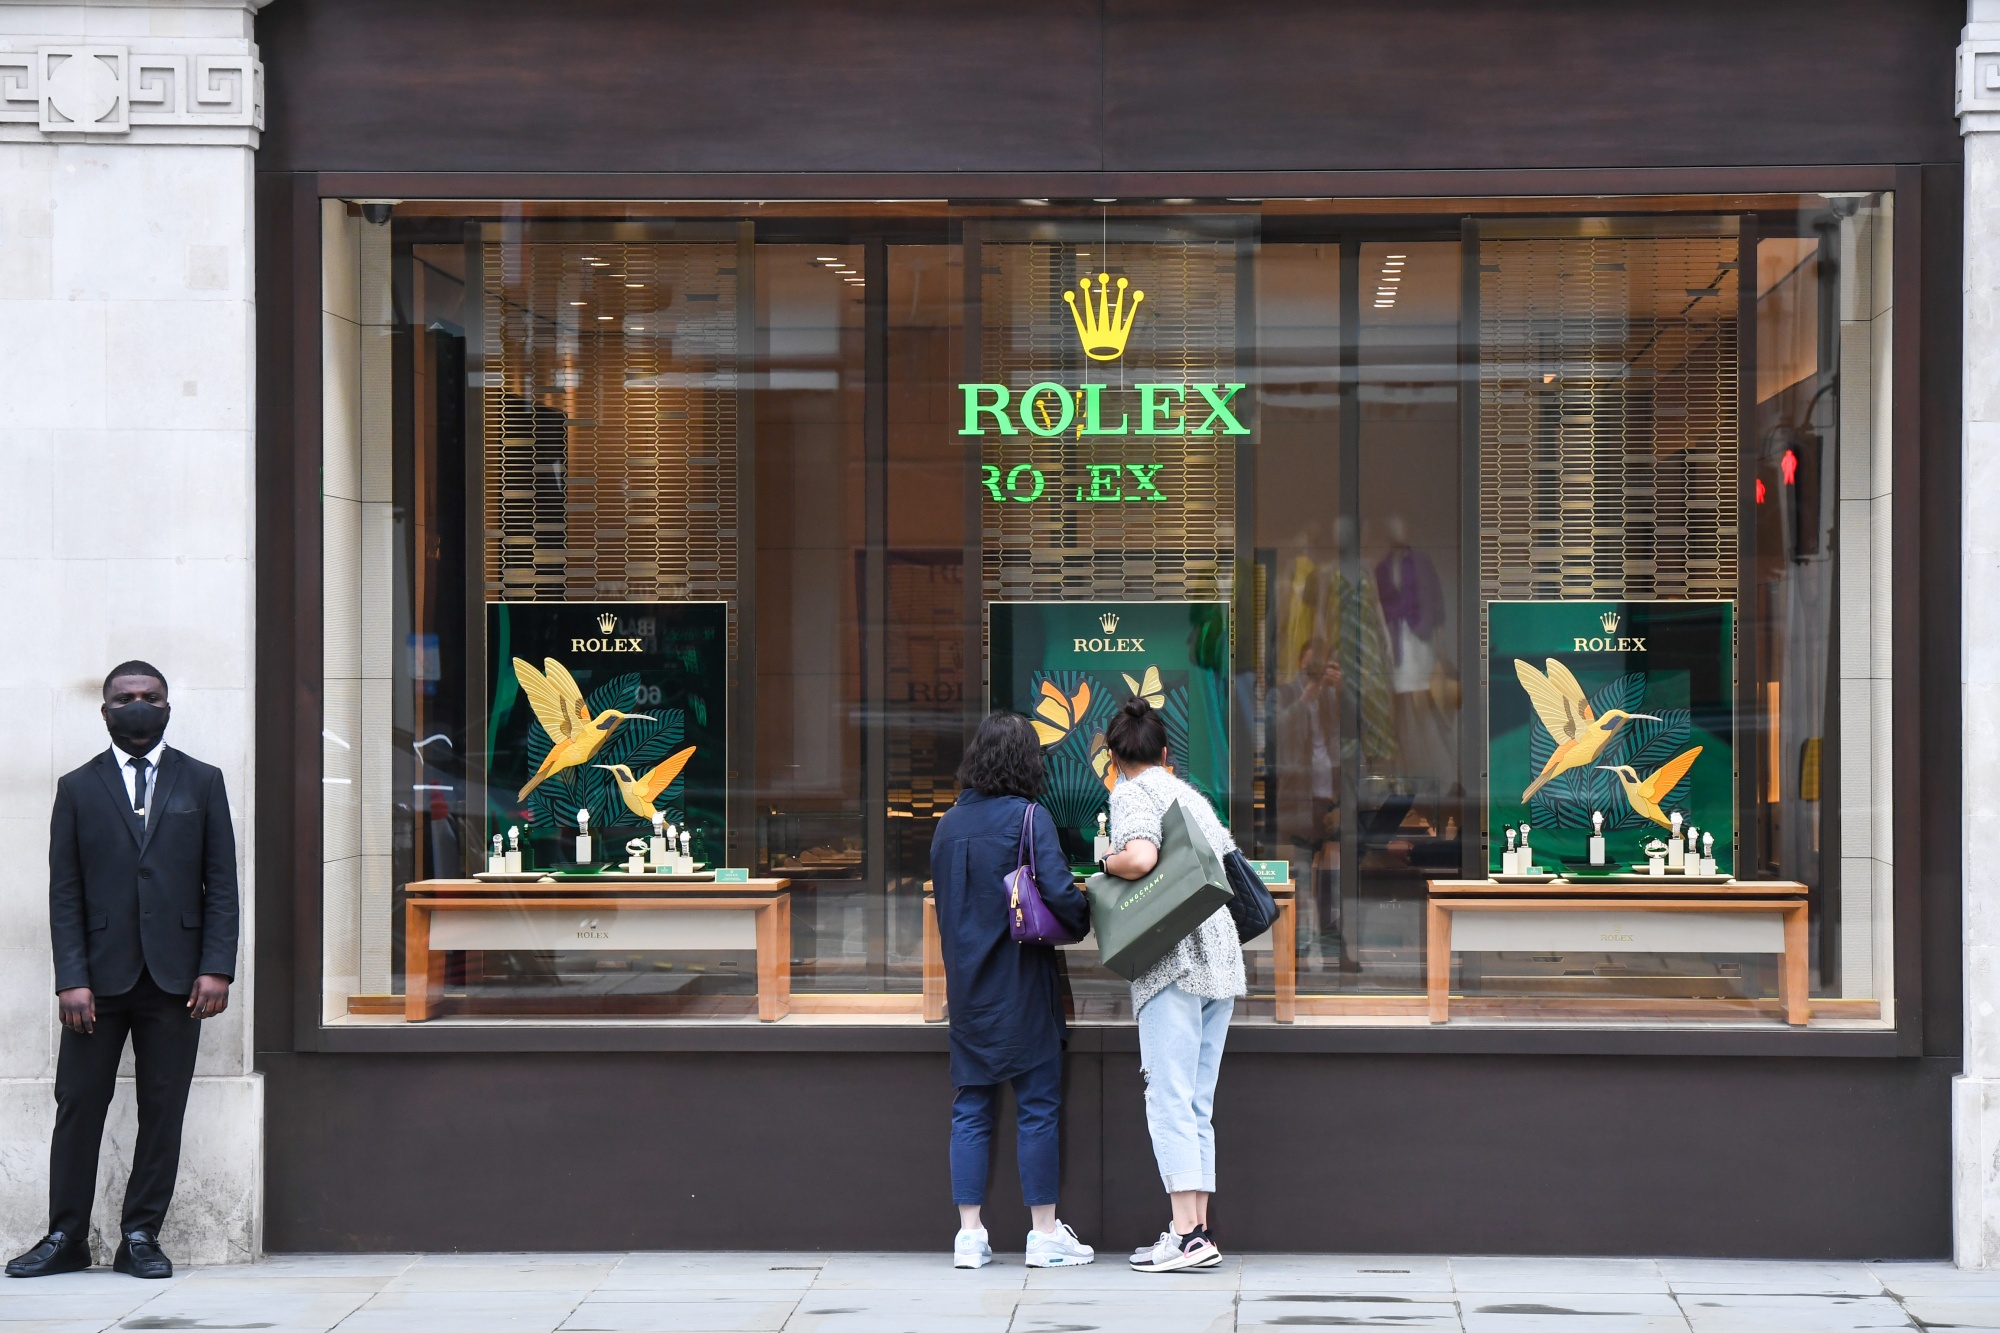 frivillig Lille bitte musikalsk Watches of Switzerland Rolex Store in London to Move to New Space 8 Times  Bigger - Bloomberg